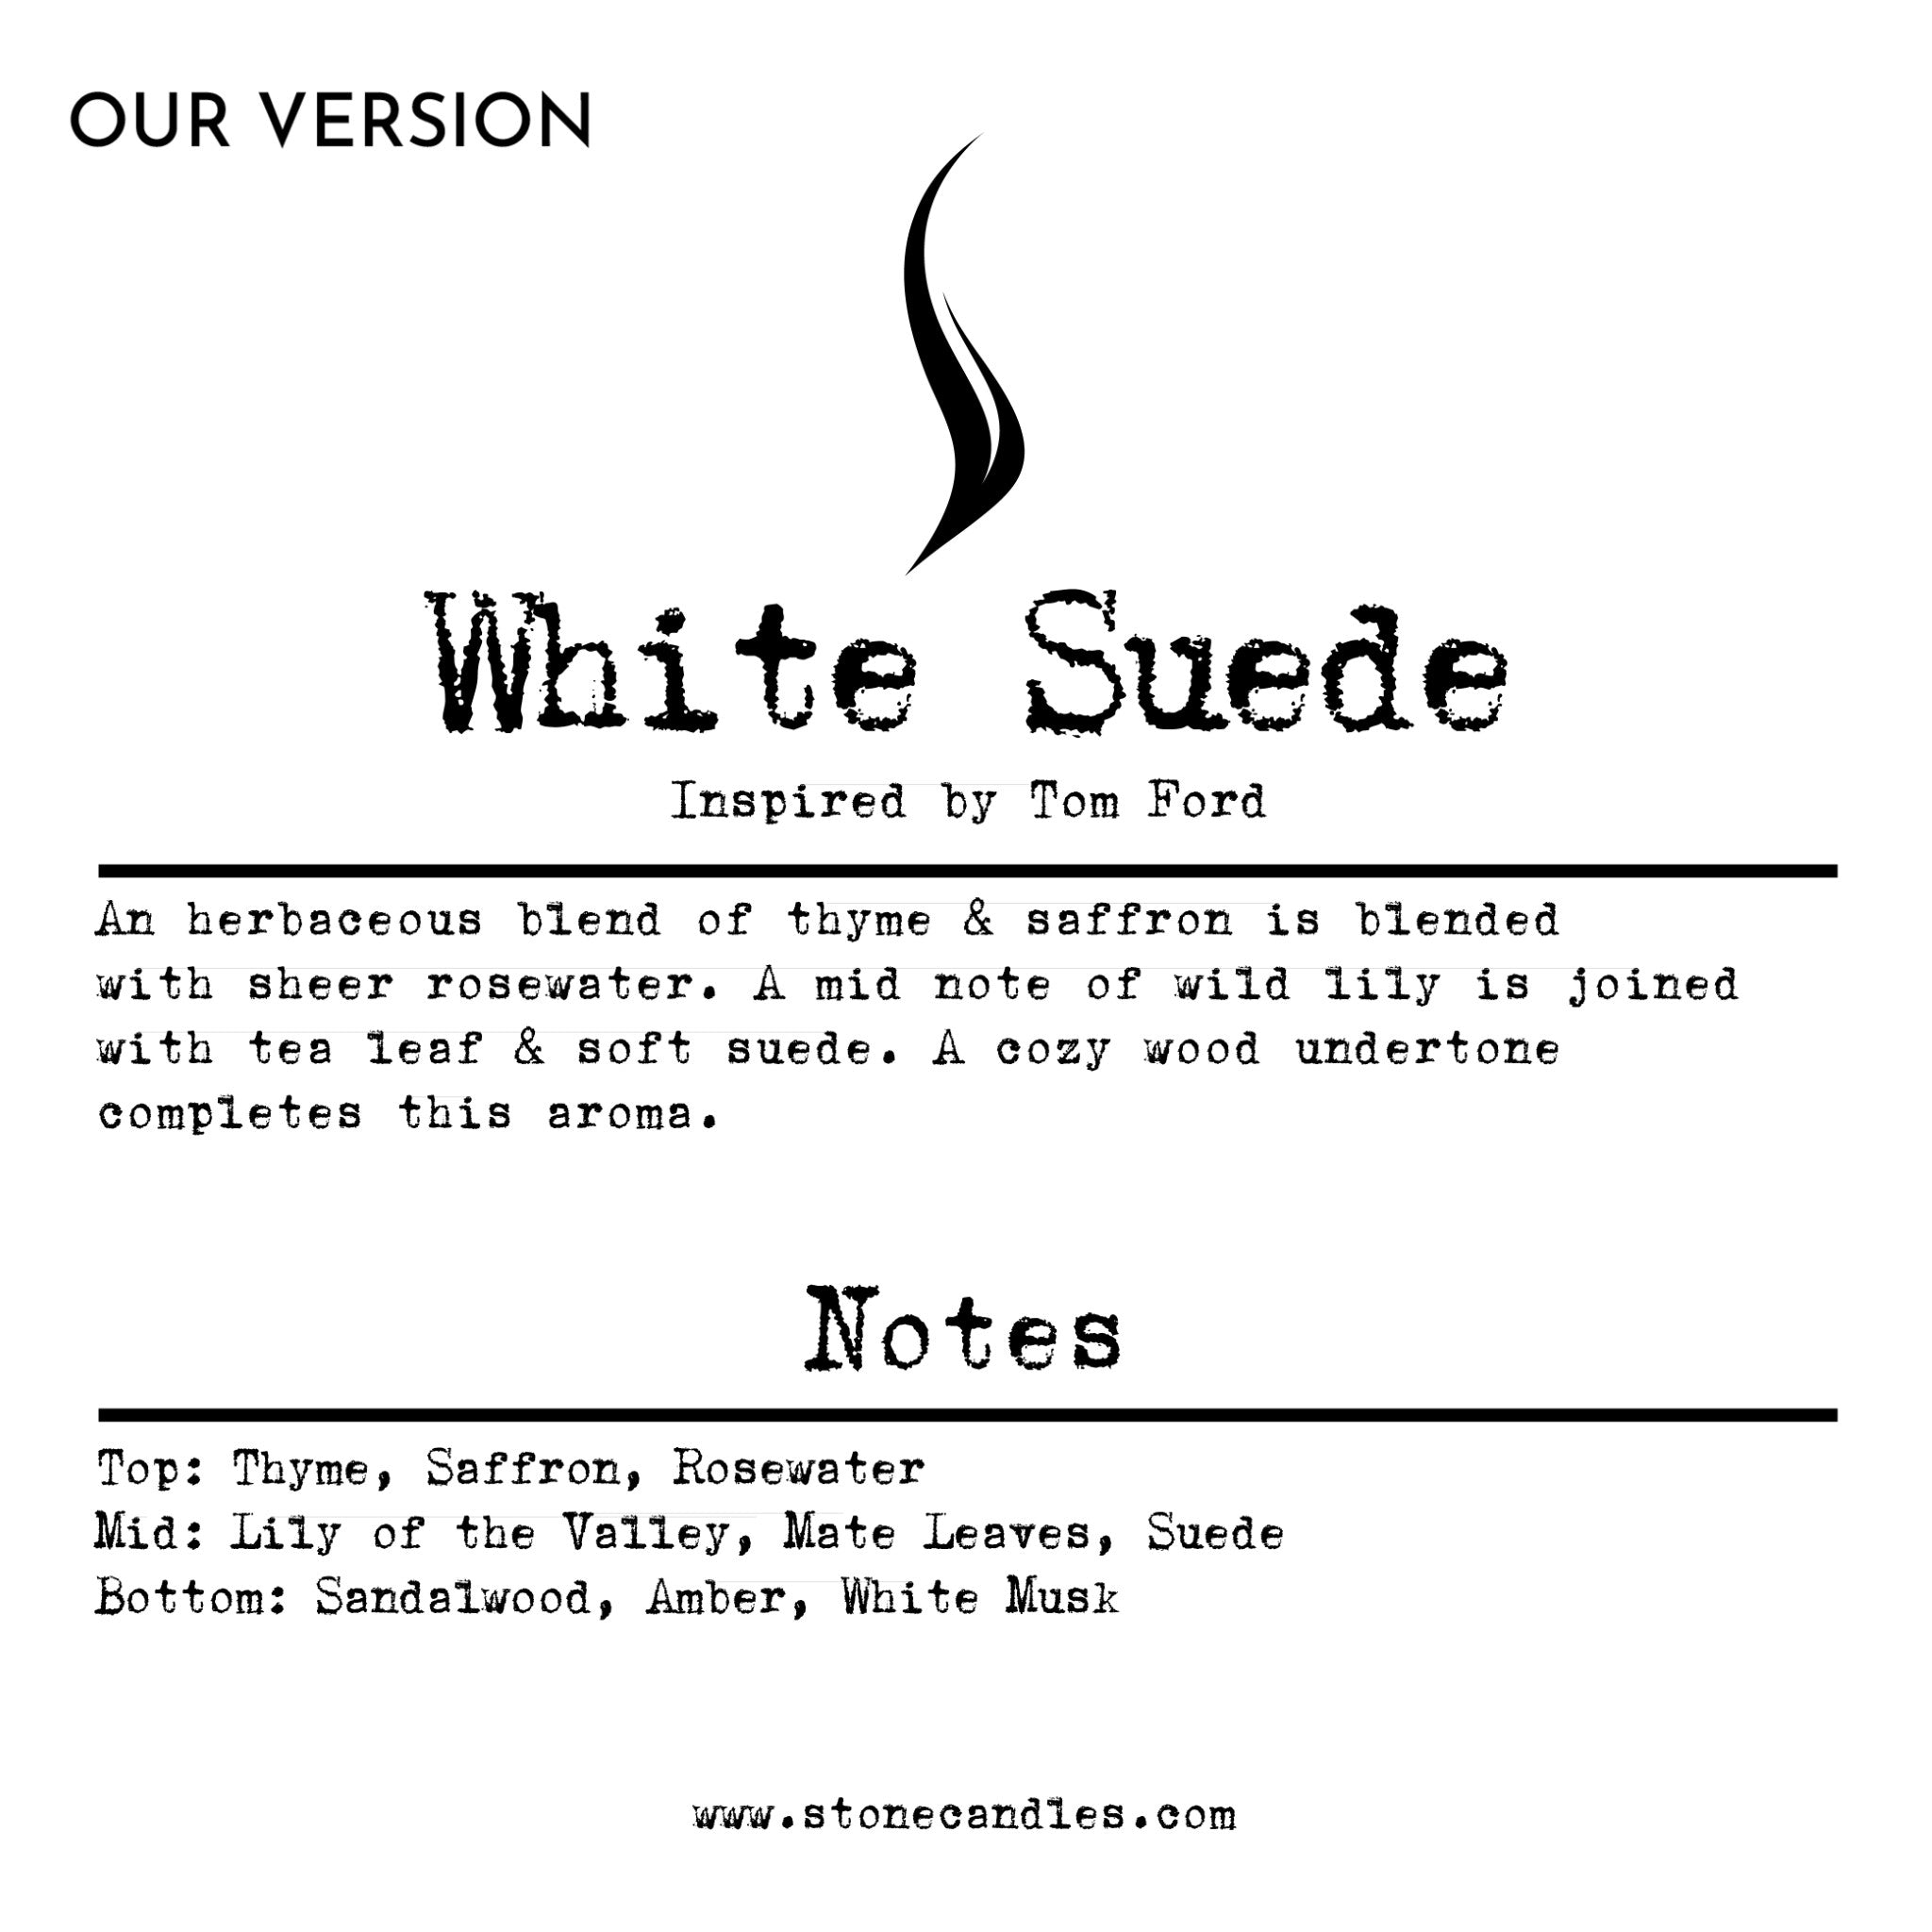 White Suede (our version) Sample Scent Strip